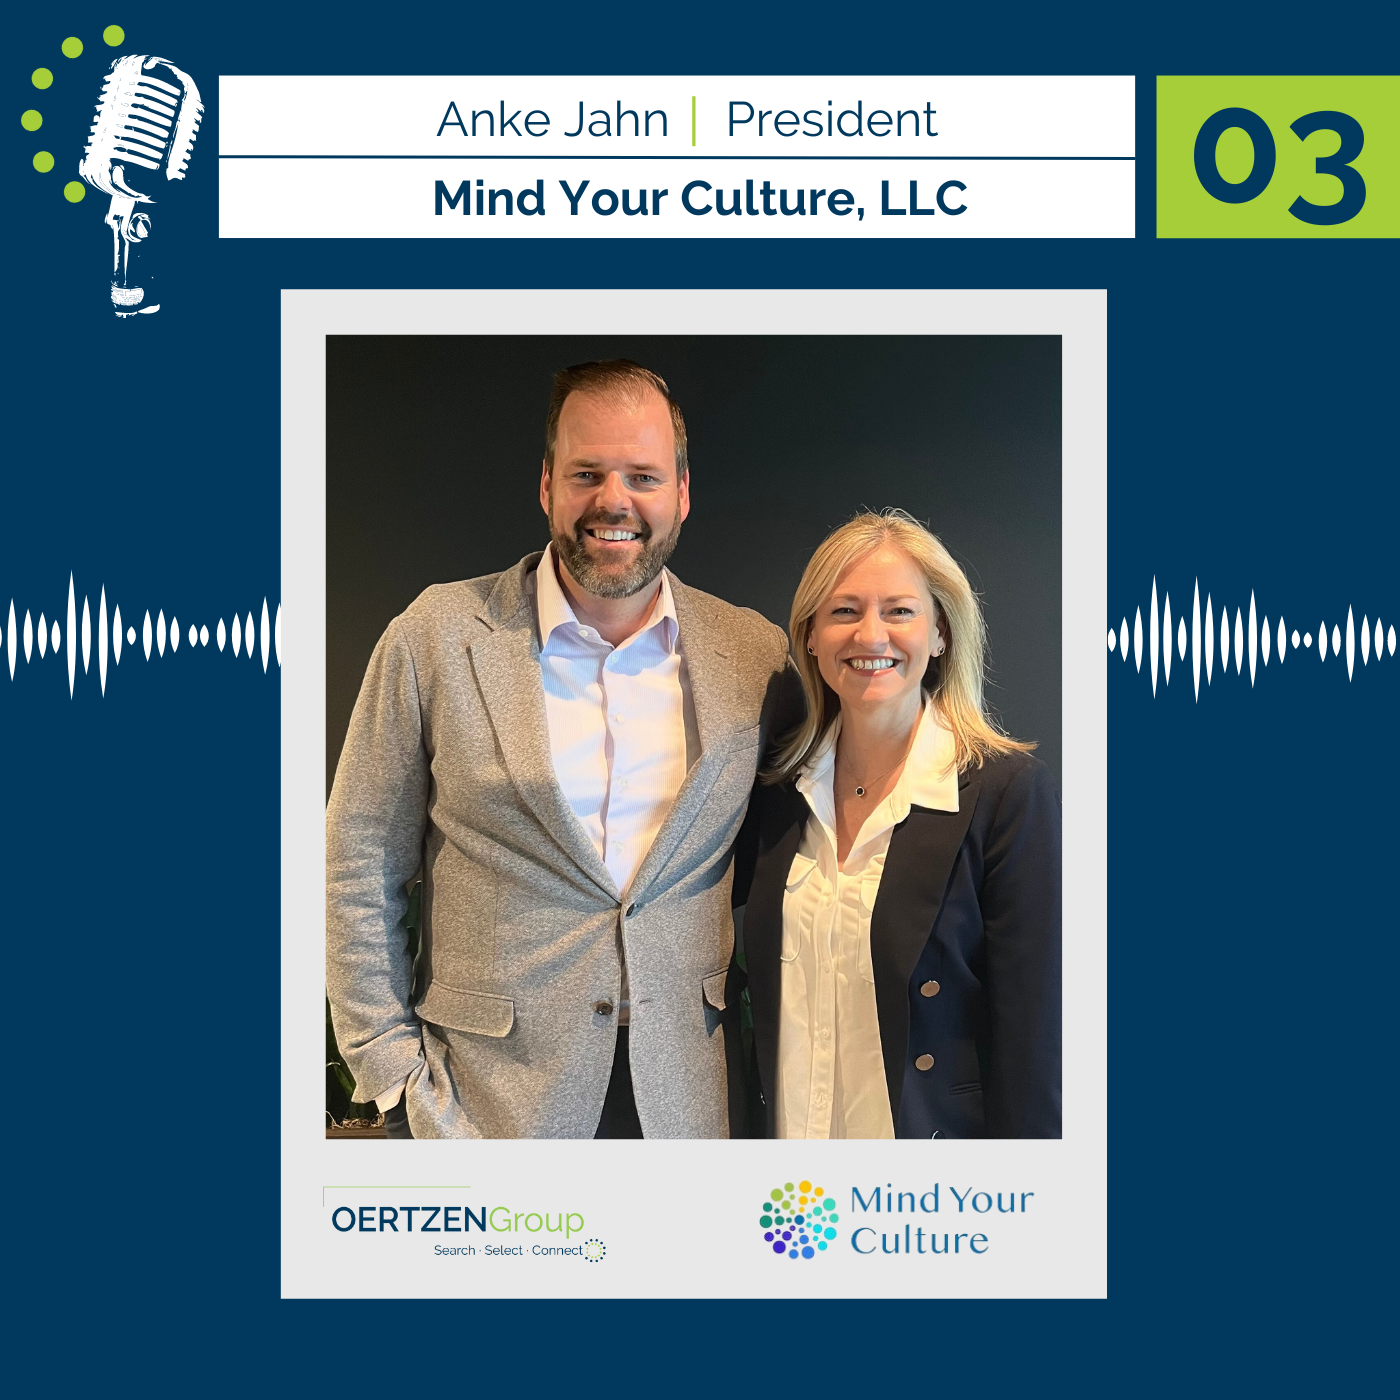 03 – How to manage intercultural differences and diversity in the workplace – with Anke Jahn, President of Mind your Culture, LLC